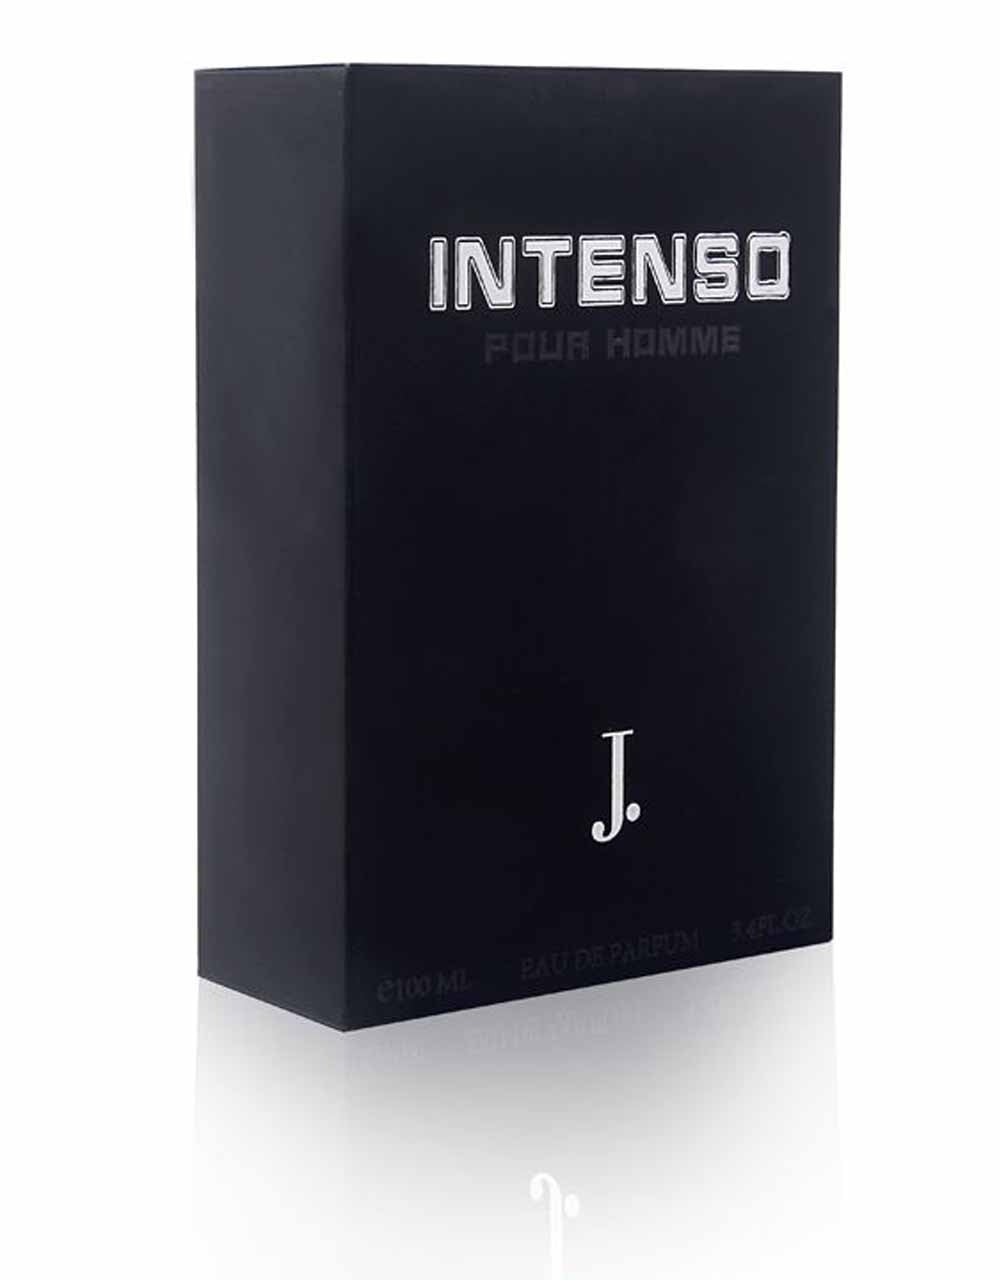 Intenso Pour Homme For Men